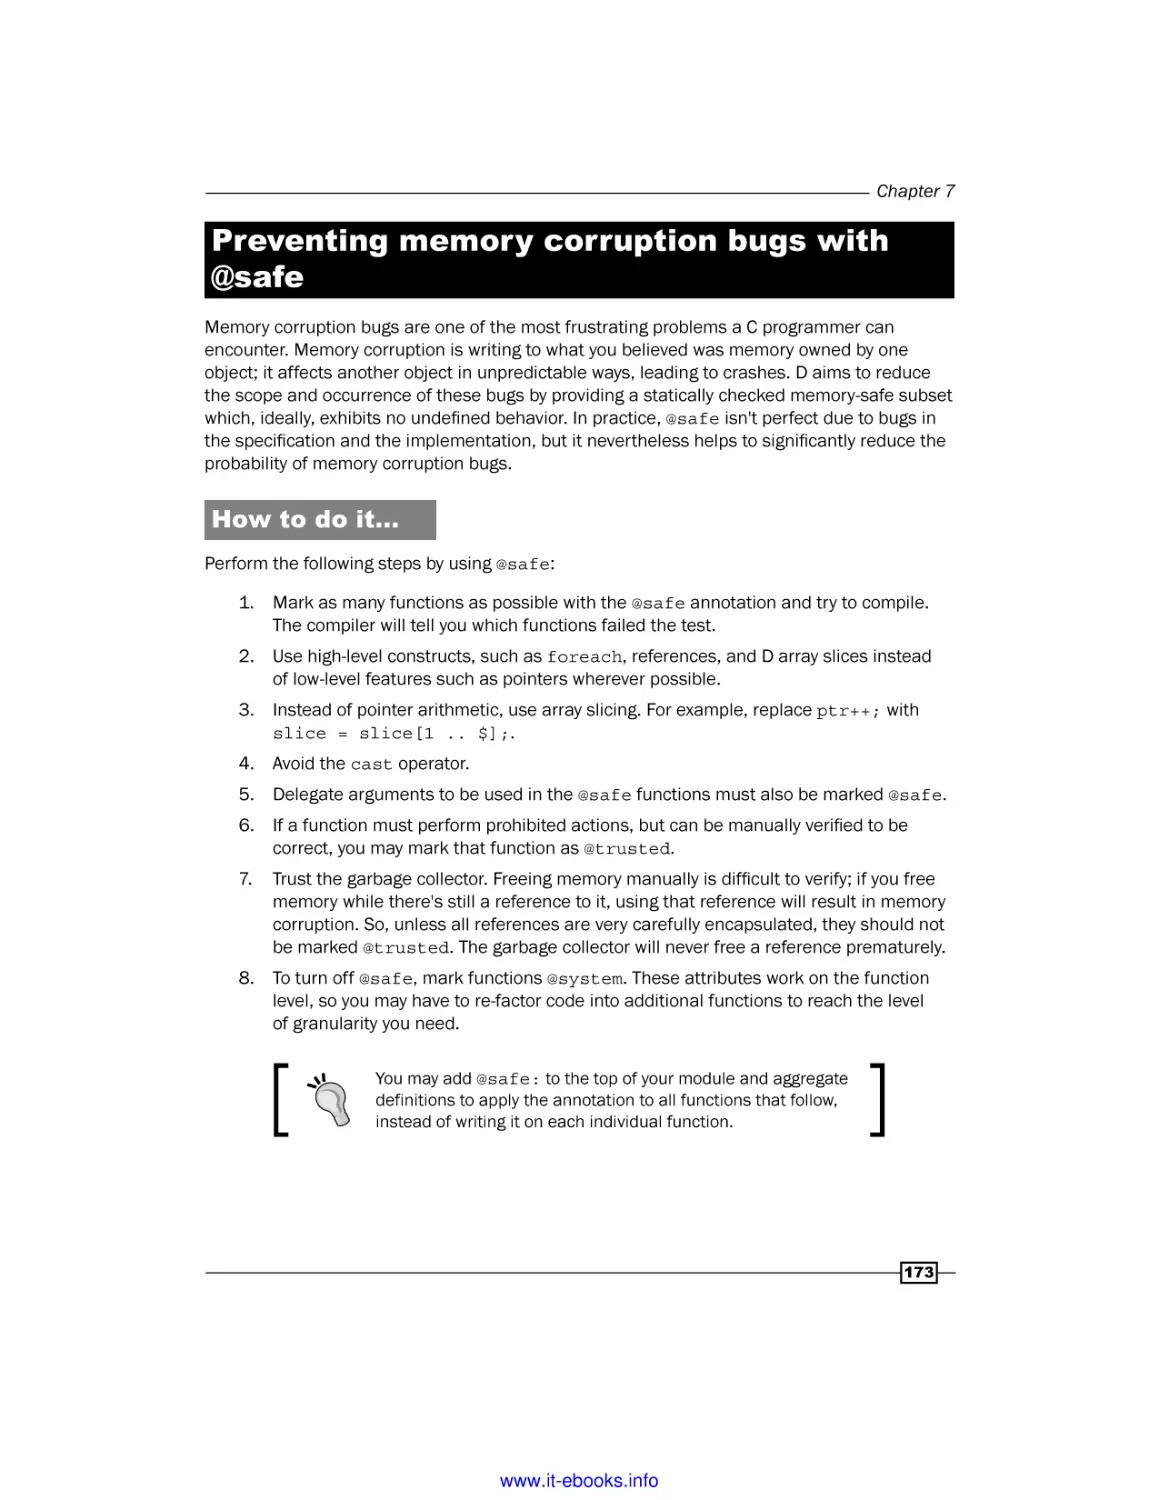 Preventing memory corruption bugs with